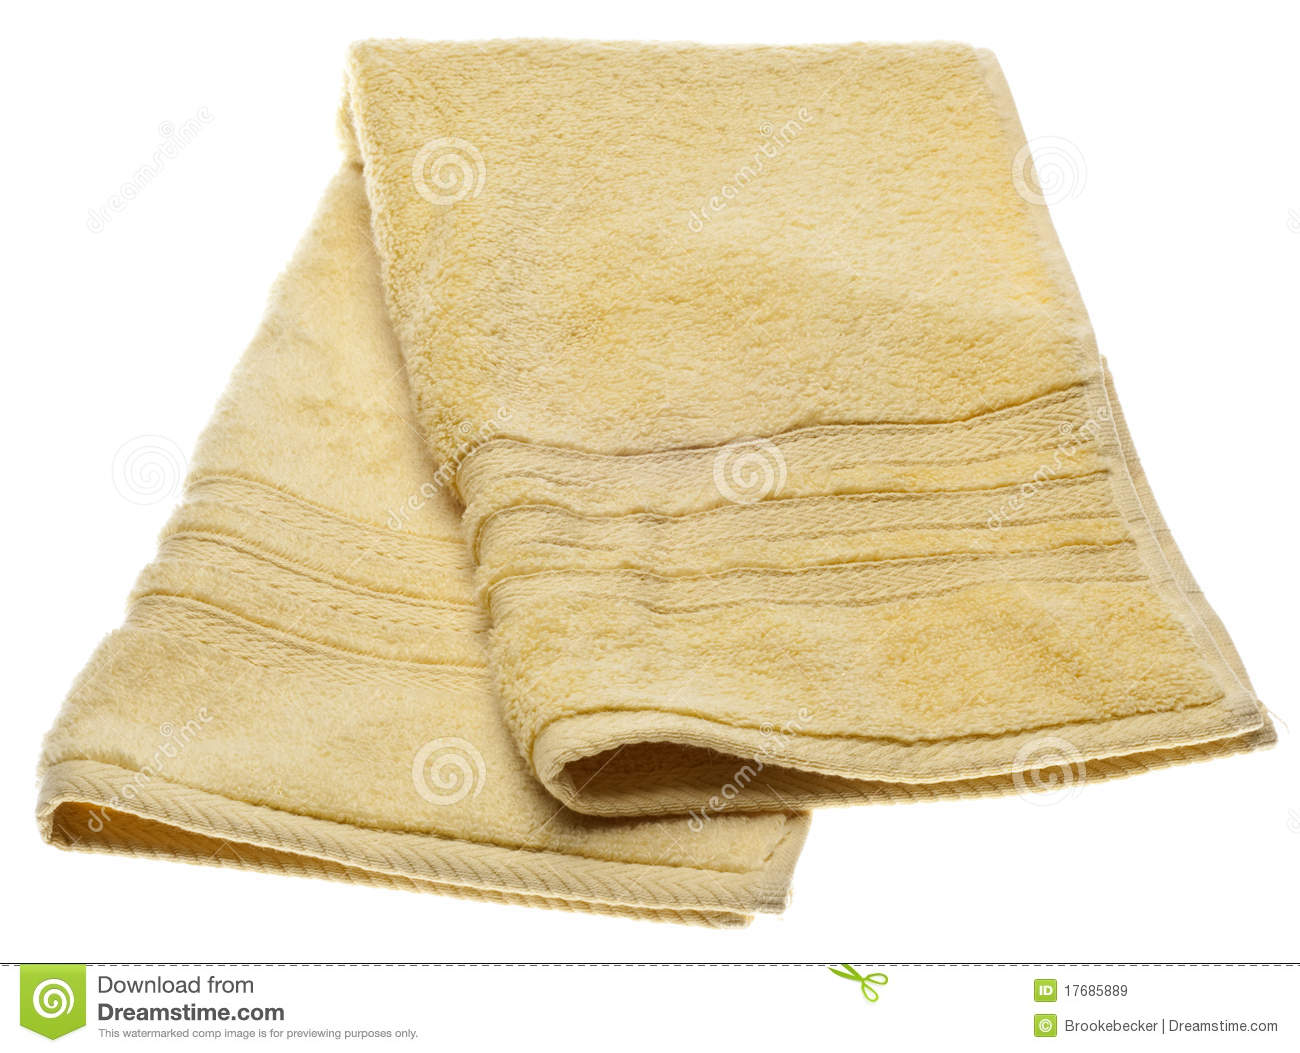 Yellow Kitchen Dish Towel Royalty Free Stock Images   Image  17685889